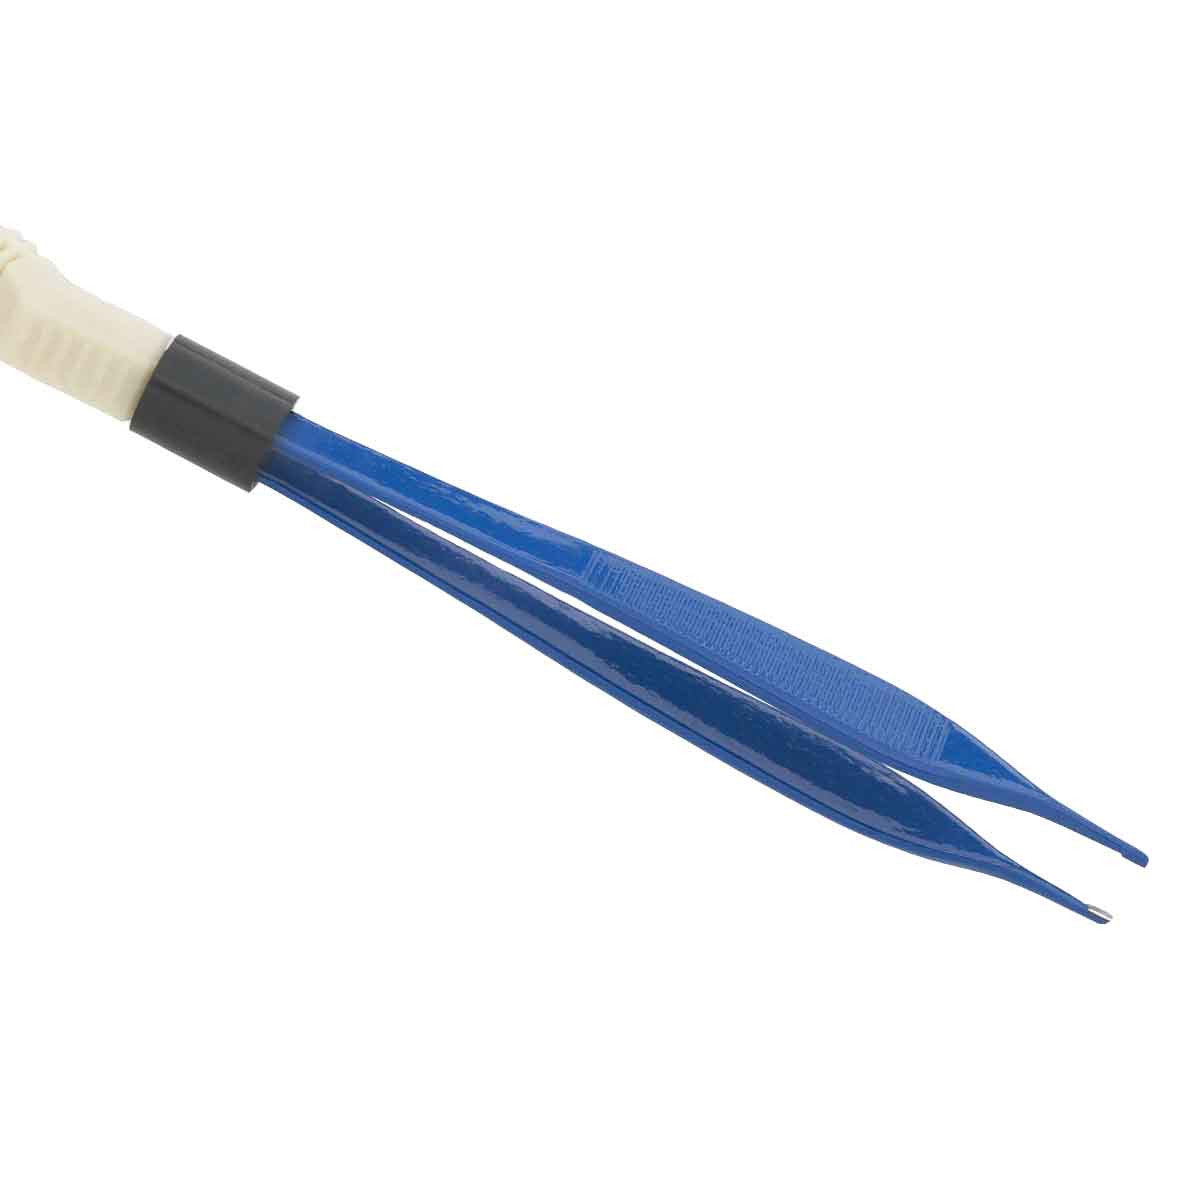 ConMed Adson Reusable Electrosurgical Forceps